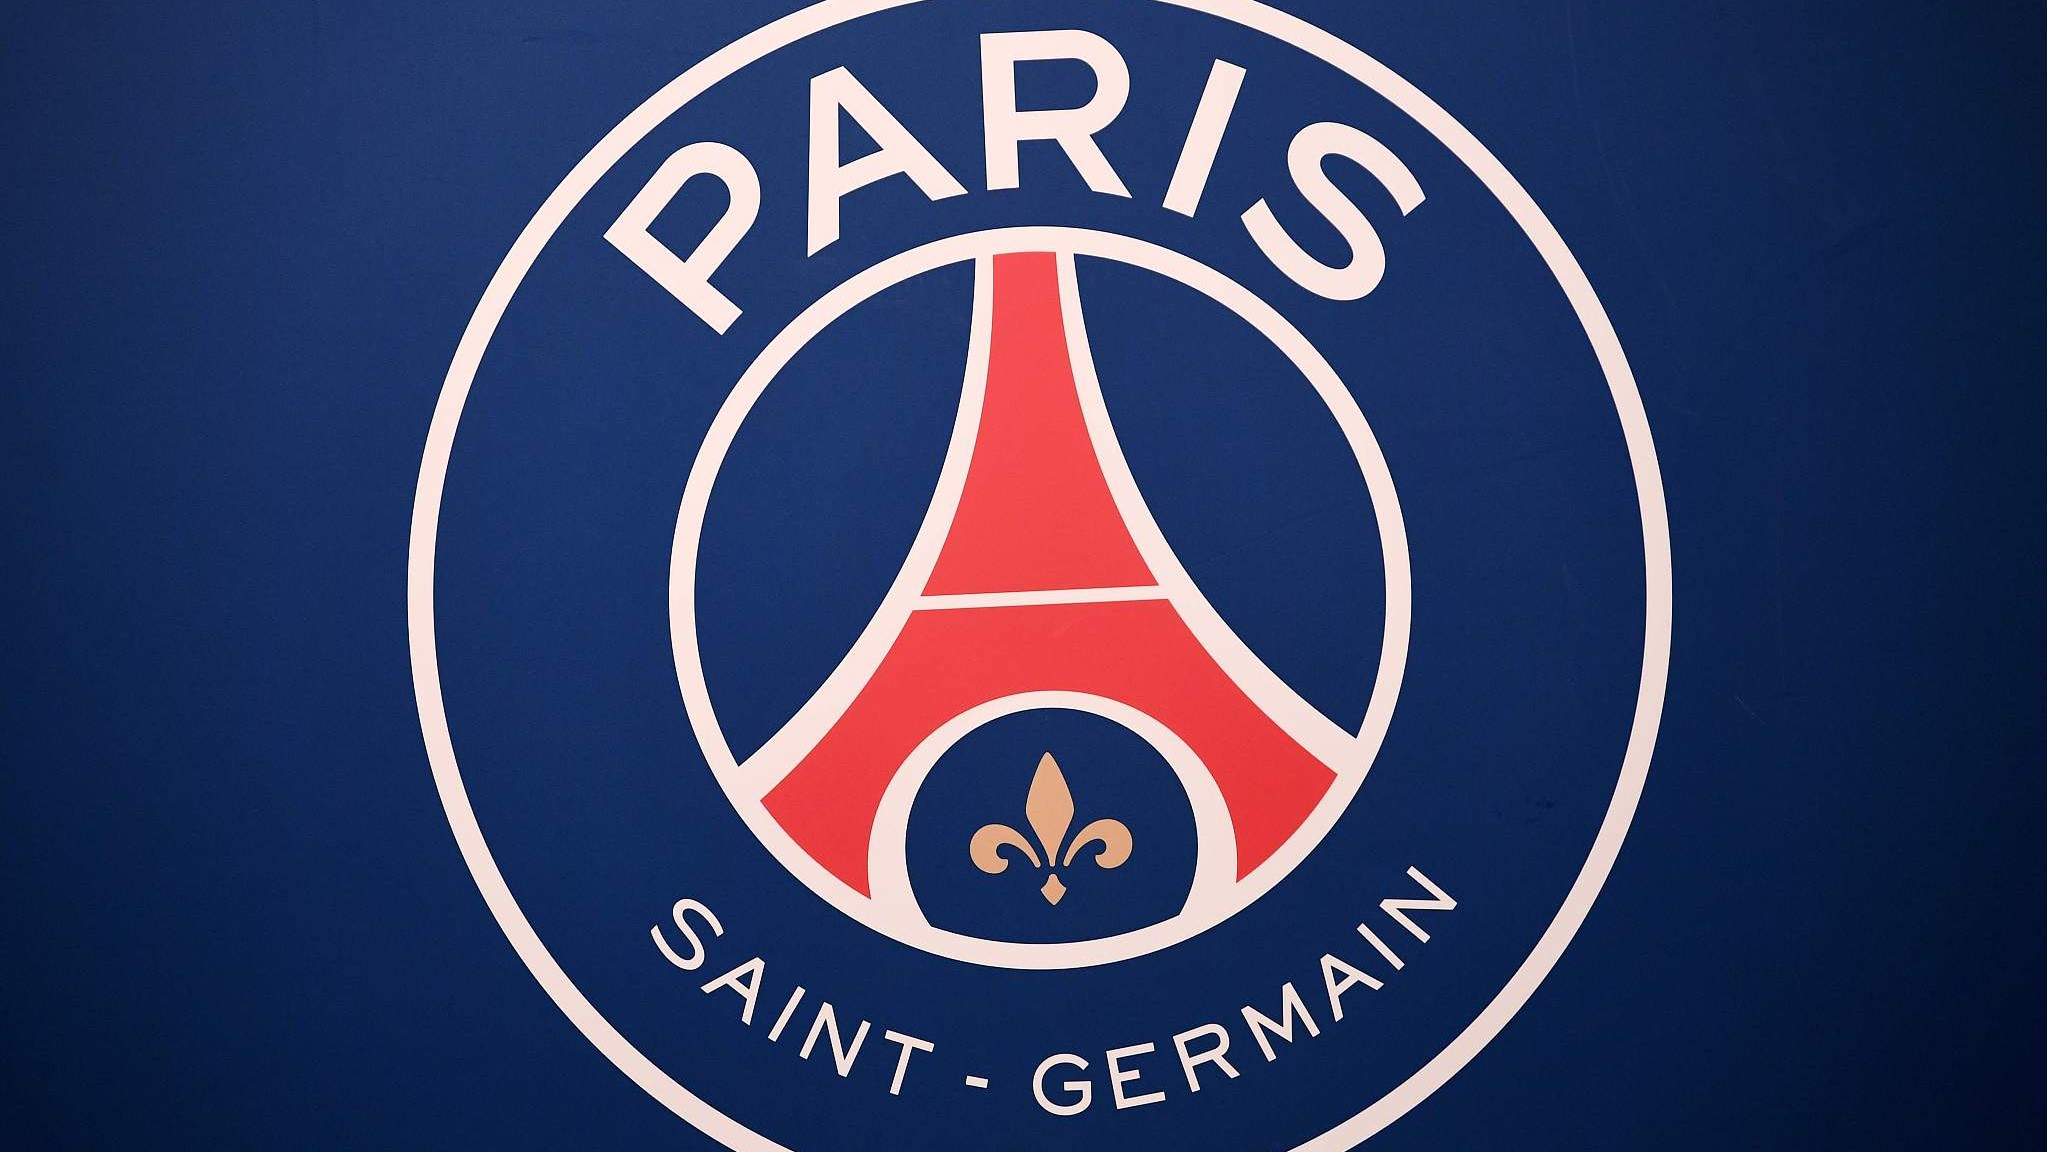 French football club PSG confirm allegations of racism - CGTN